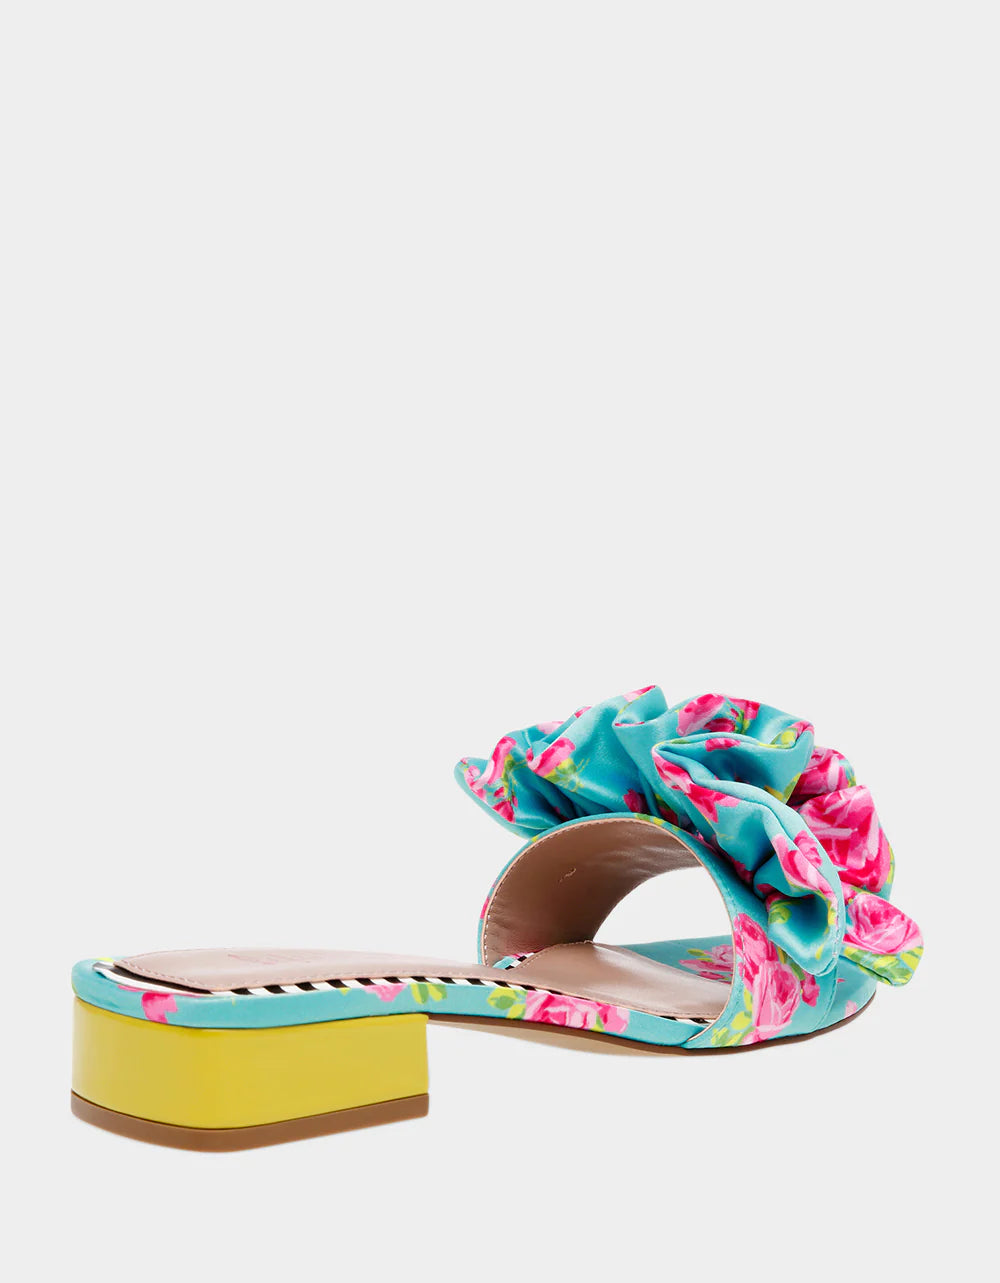 BETSEY JOHNSON BLUE FLORAL SLIPPERS